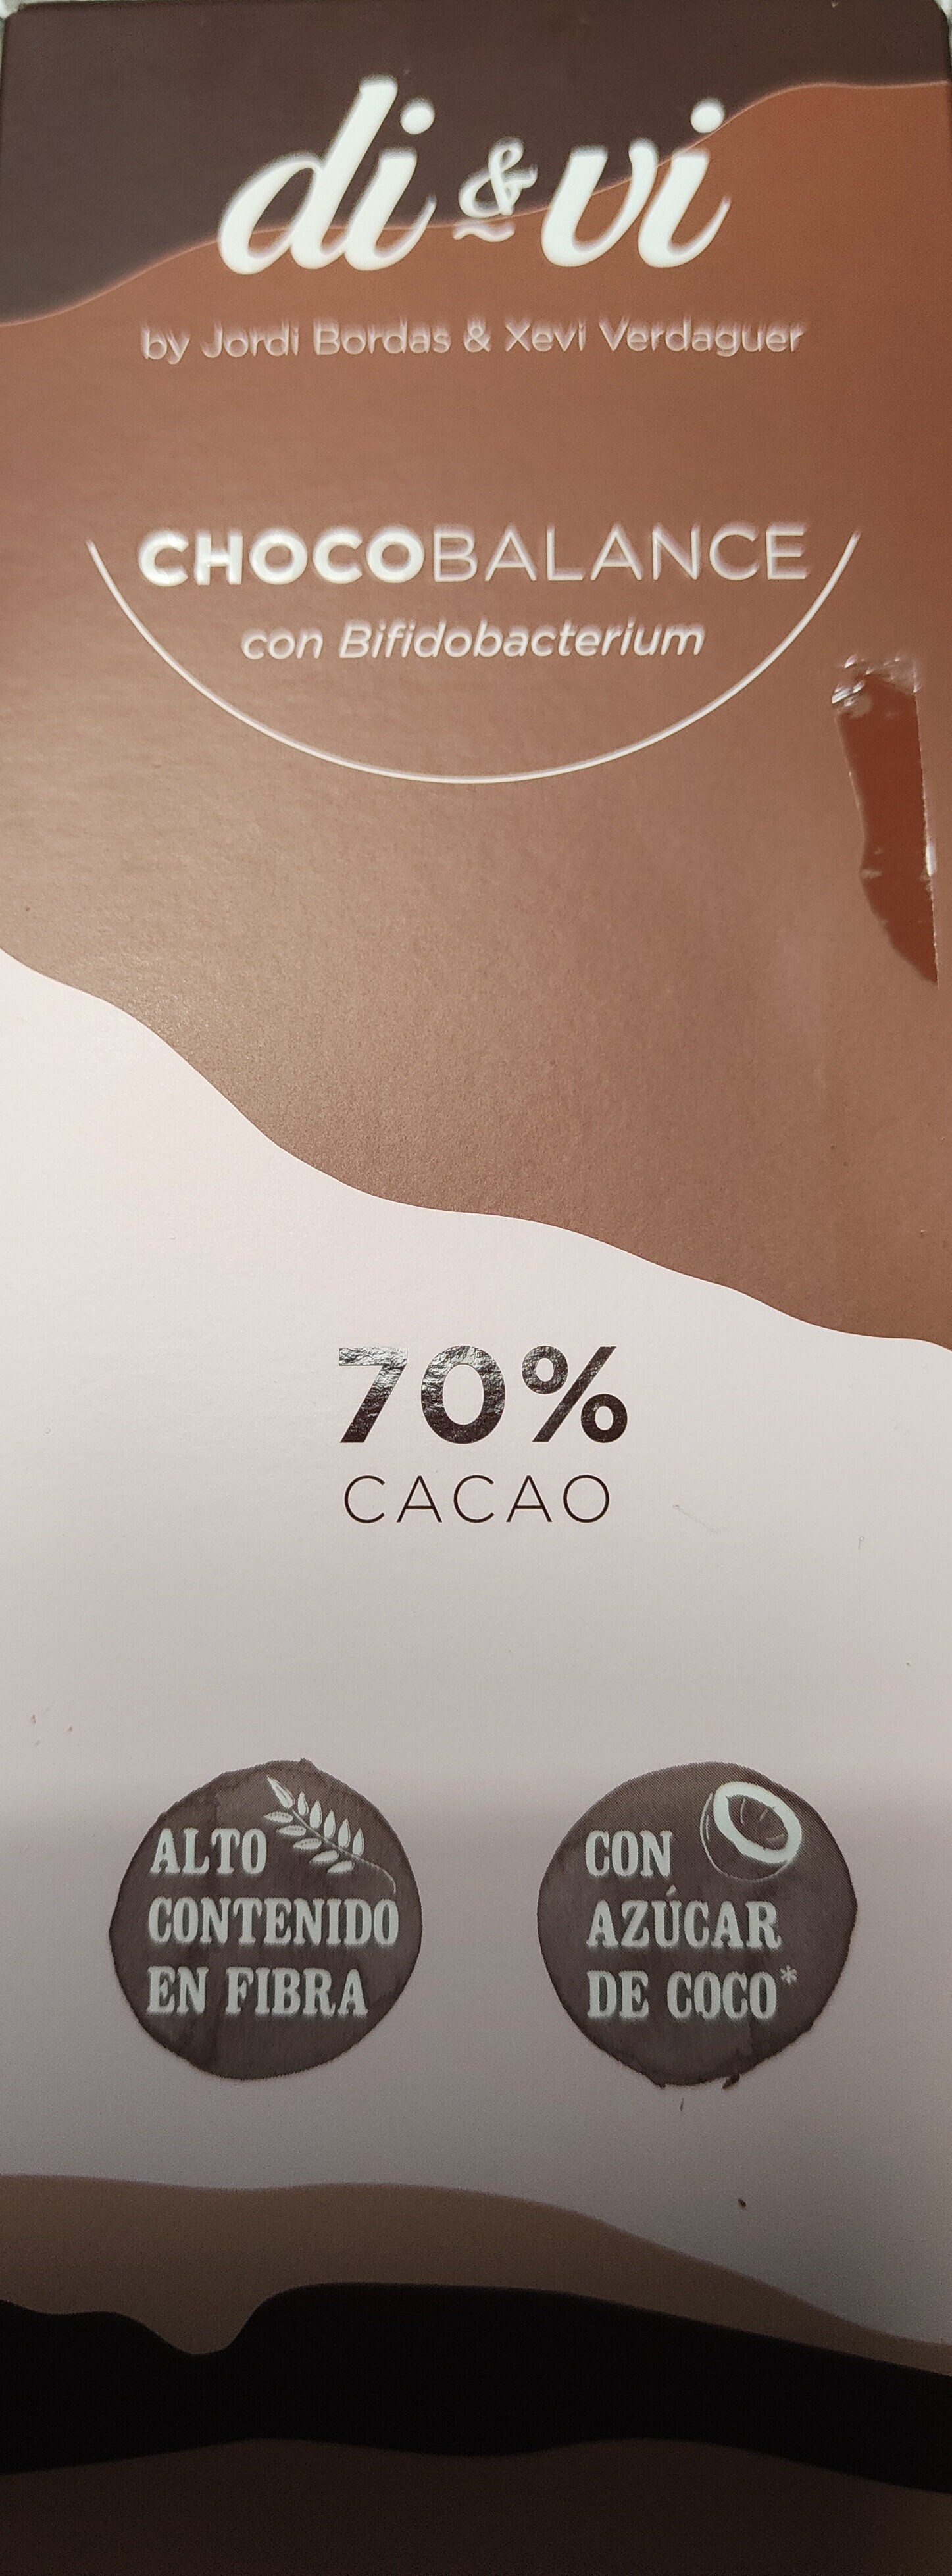 ChocoBalance 70% cacao - Producto